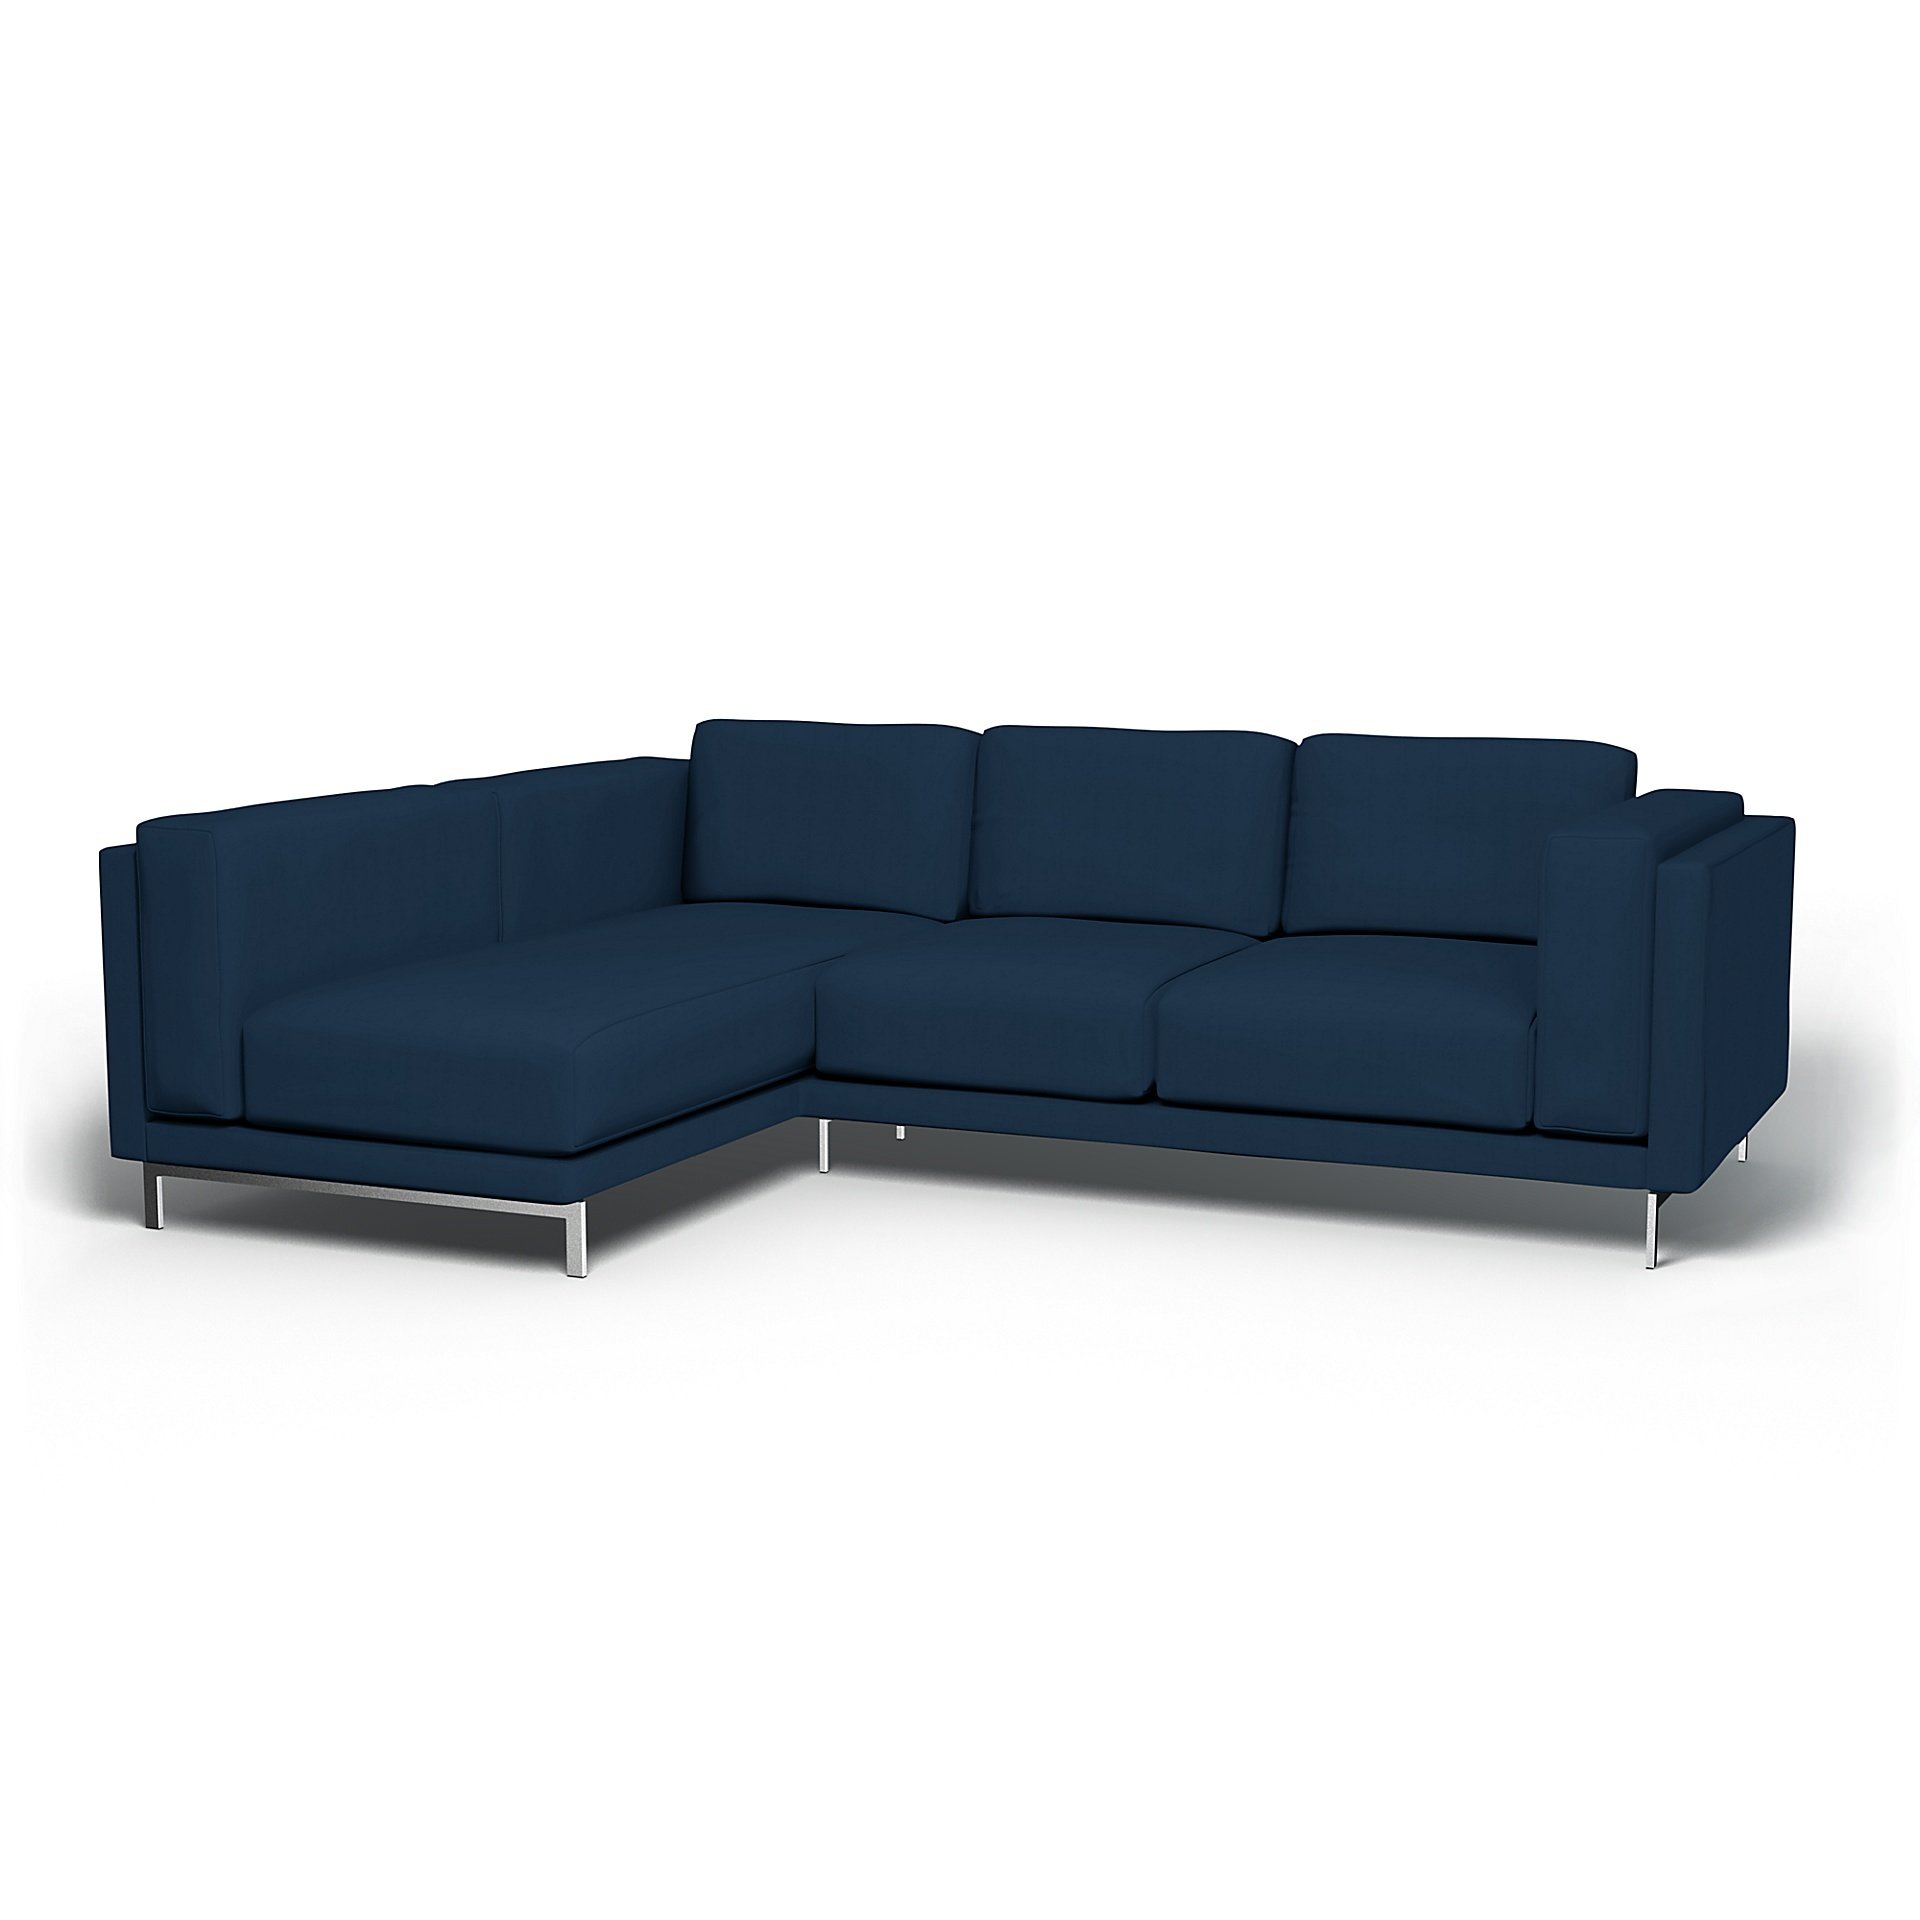 IKEA - Nockeby 3 Seater Sofa with Left Chaise Cover, Deep Navy Blue, Cotton - Bemz